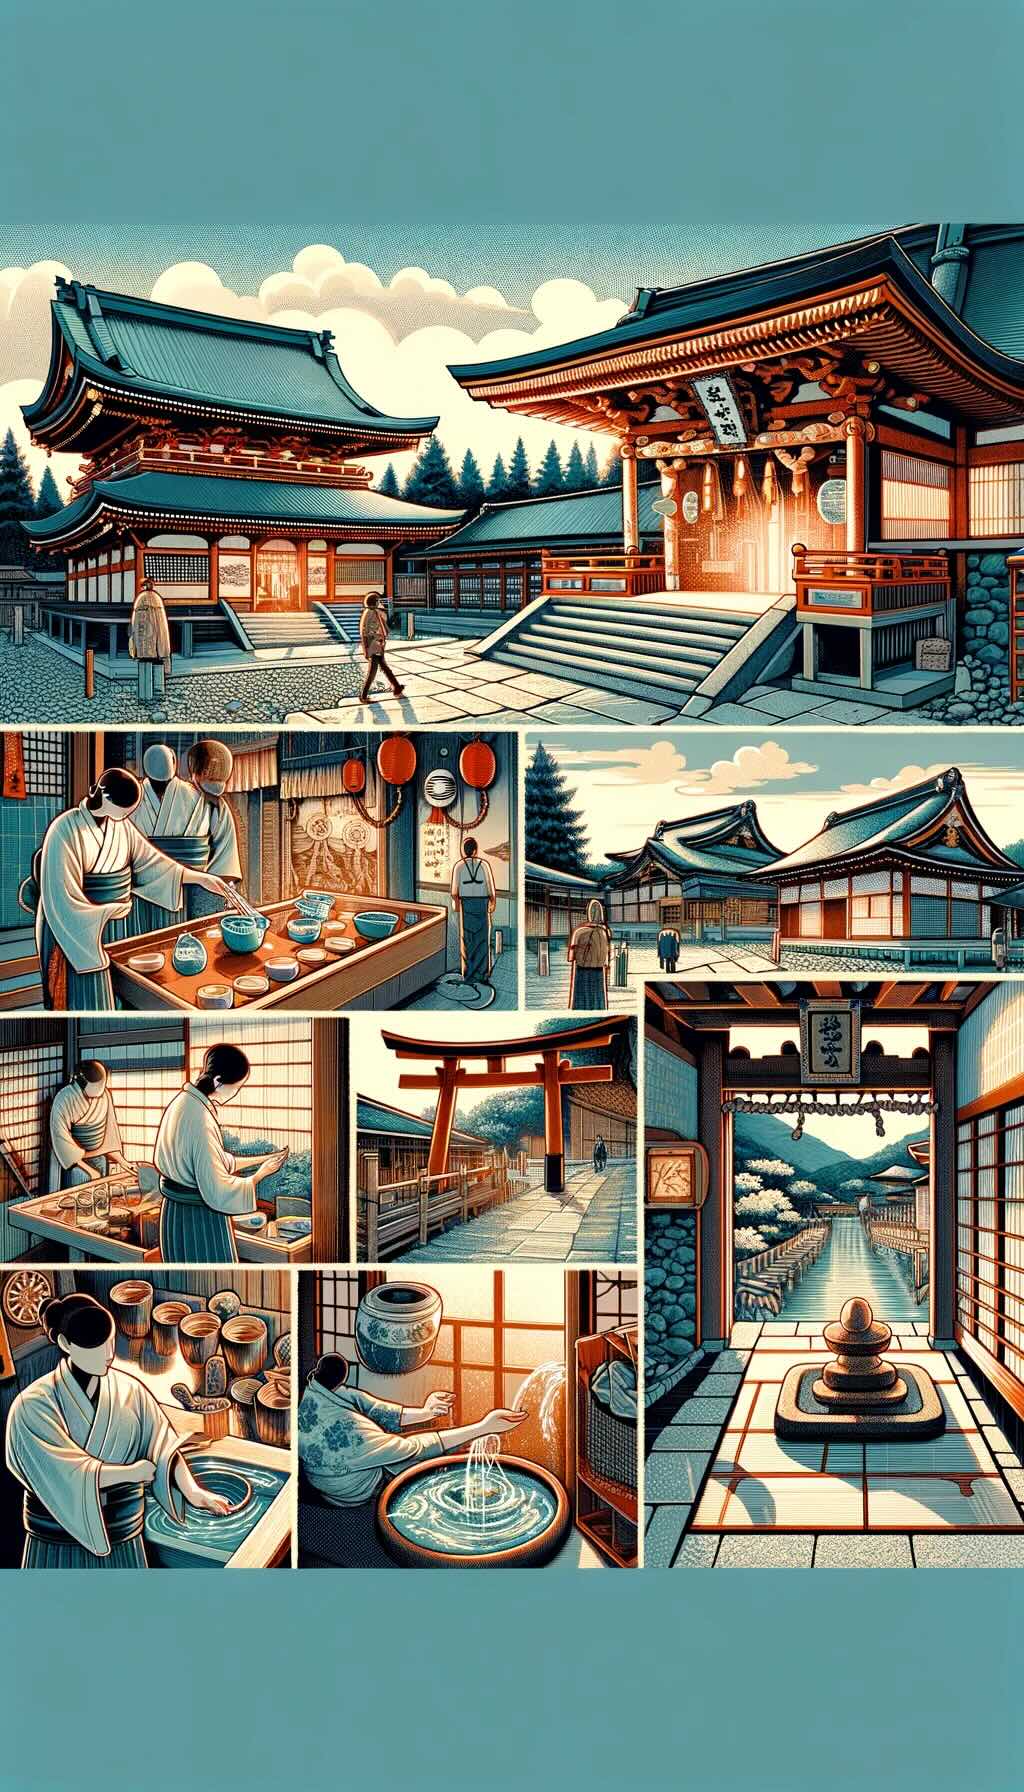 how to respectfully visit shrines and temples in Japan illustrates a traveler observing various respectful practices at Japanese shrines and temples, including scenes of proper dress code, cleansing rituals at the entrance (such as washing hands and mouth), quiet and contemplative behavior inside the shrine or temple grounds, and proper etiquette for offering prayers or donations. The image captures the essence of respecting the sacred and spiritual nature of these places, highlighting the cultural significance and reverence associated with visiting shrines and temples in Japan accurately represents the serene and solemn atmosphere of these cultural landmarks